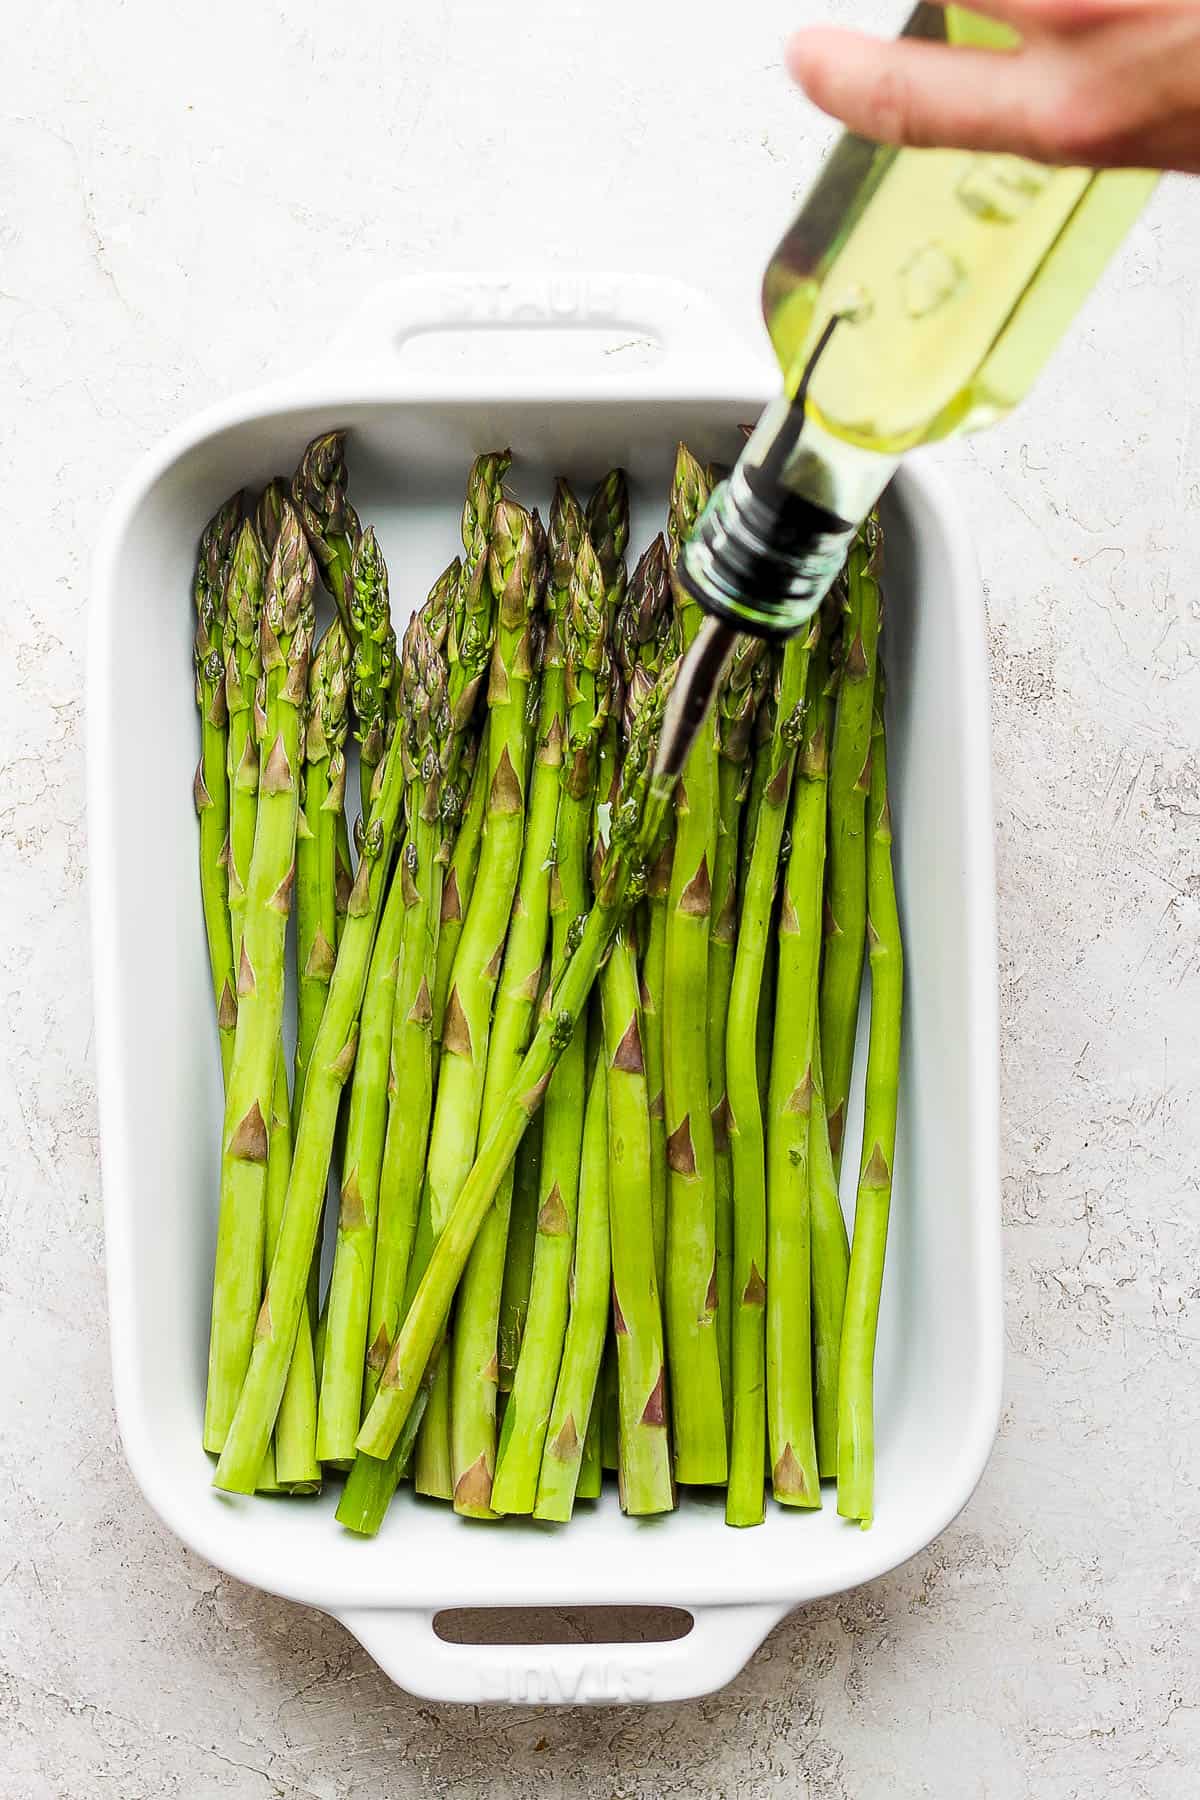 Oil being drizzled on the asparagus.